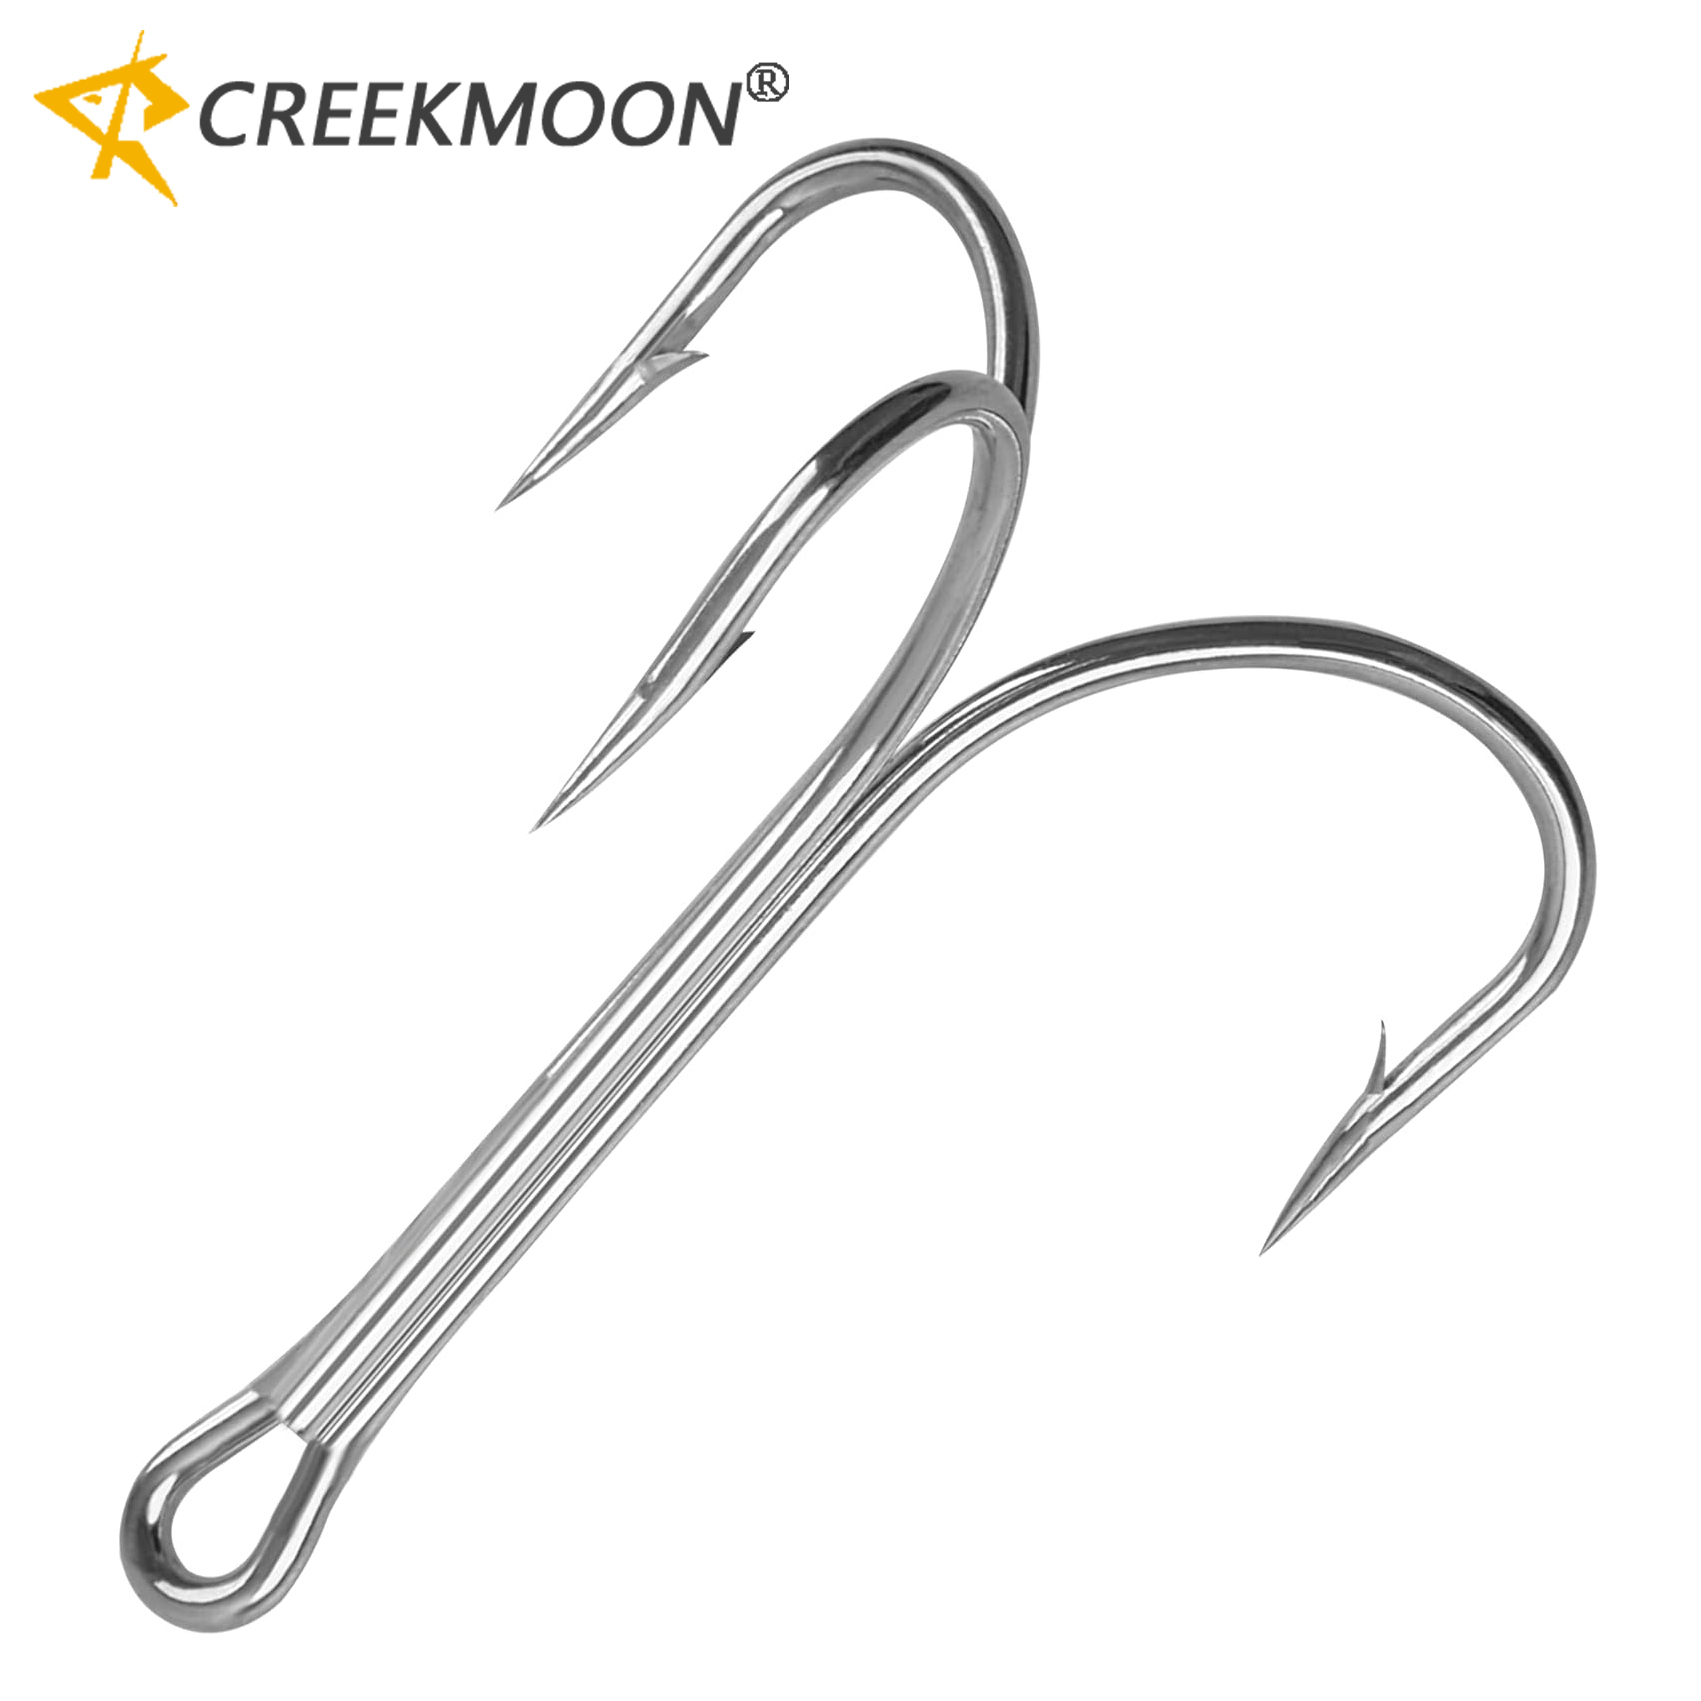 BKK Treble Fishing Hooks High Carbon Steel 4X Strong Short Shank For  Freshwater And Saltwater Tools 231225 From Fan05, $12.07